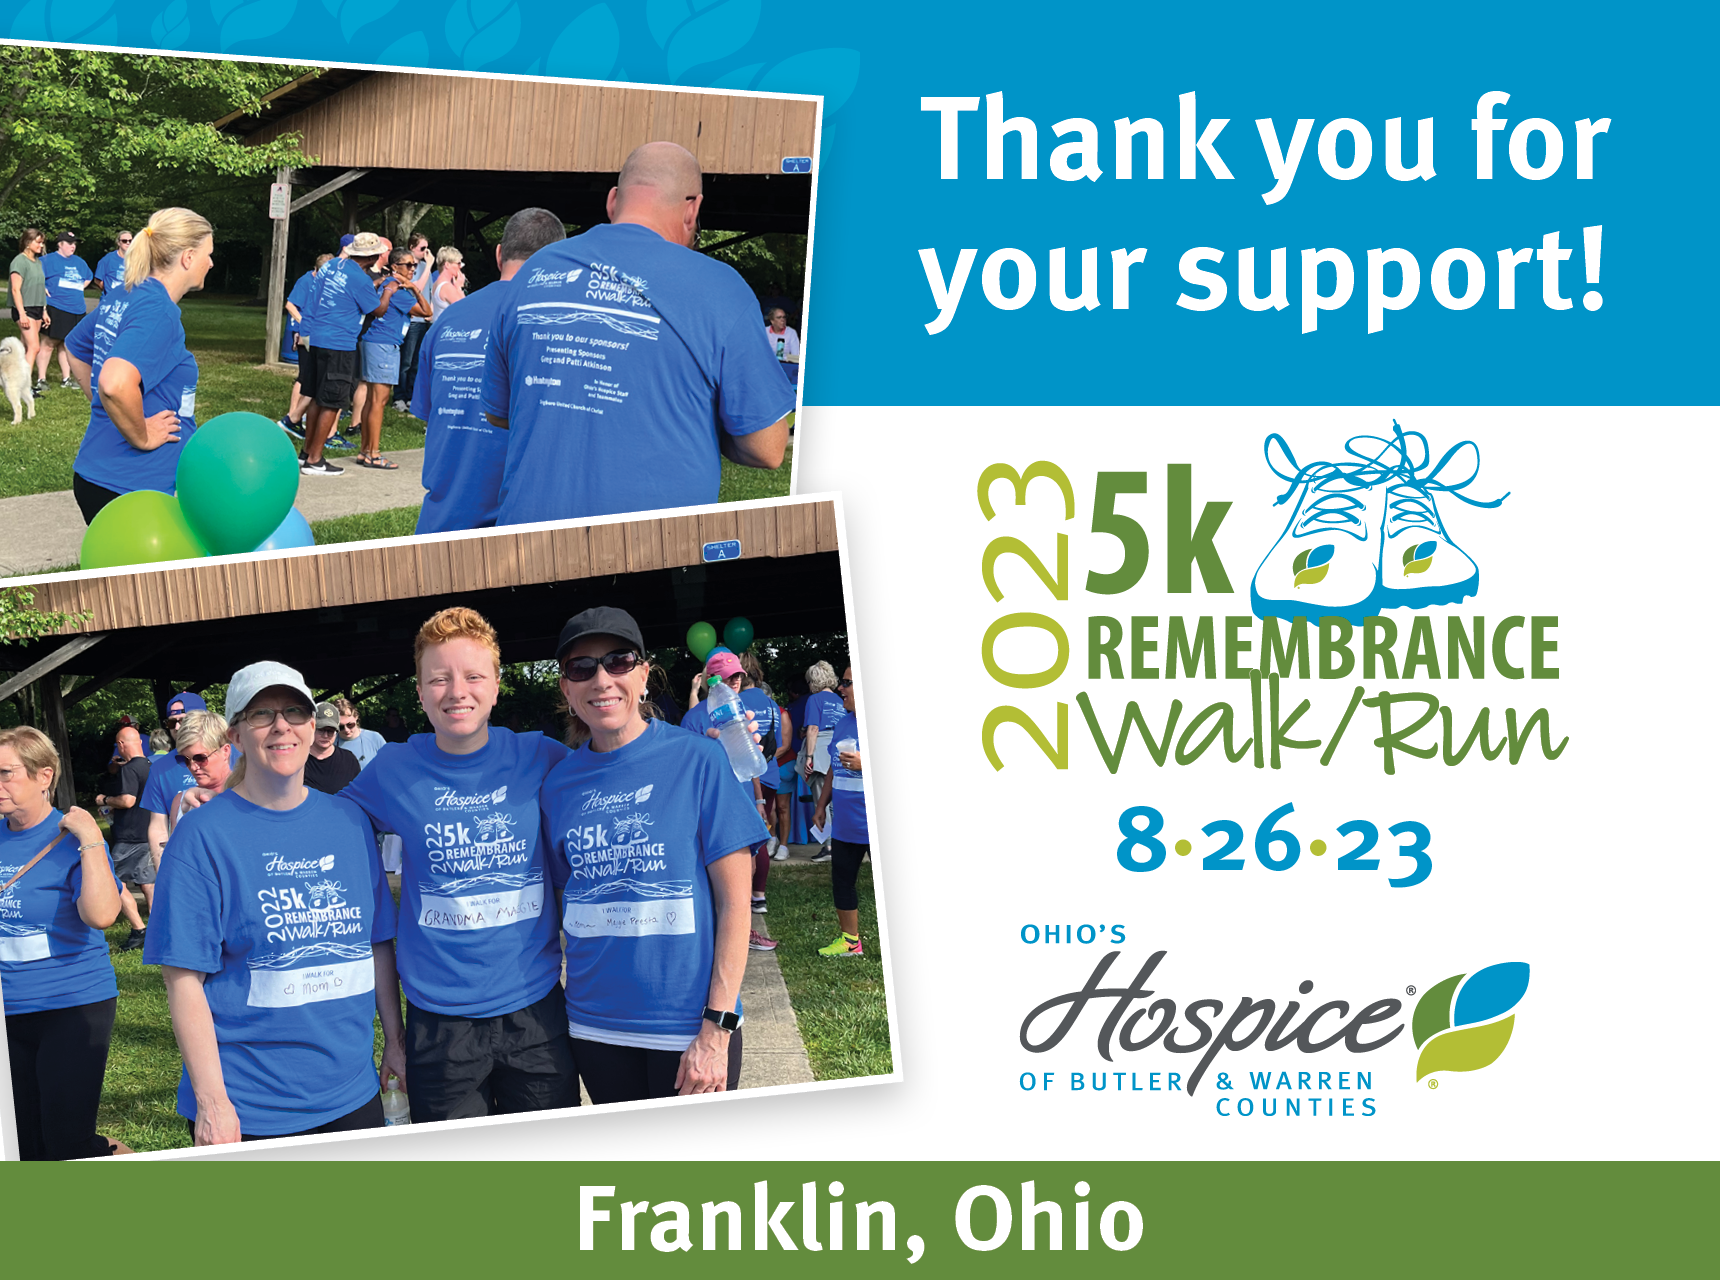 Thank you for your support! Remembrance Walk 2023. Ohio's Hospice of Butler & Warren Counties.